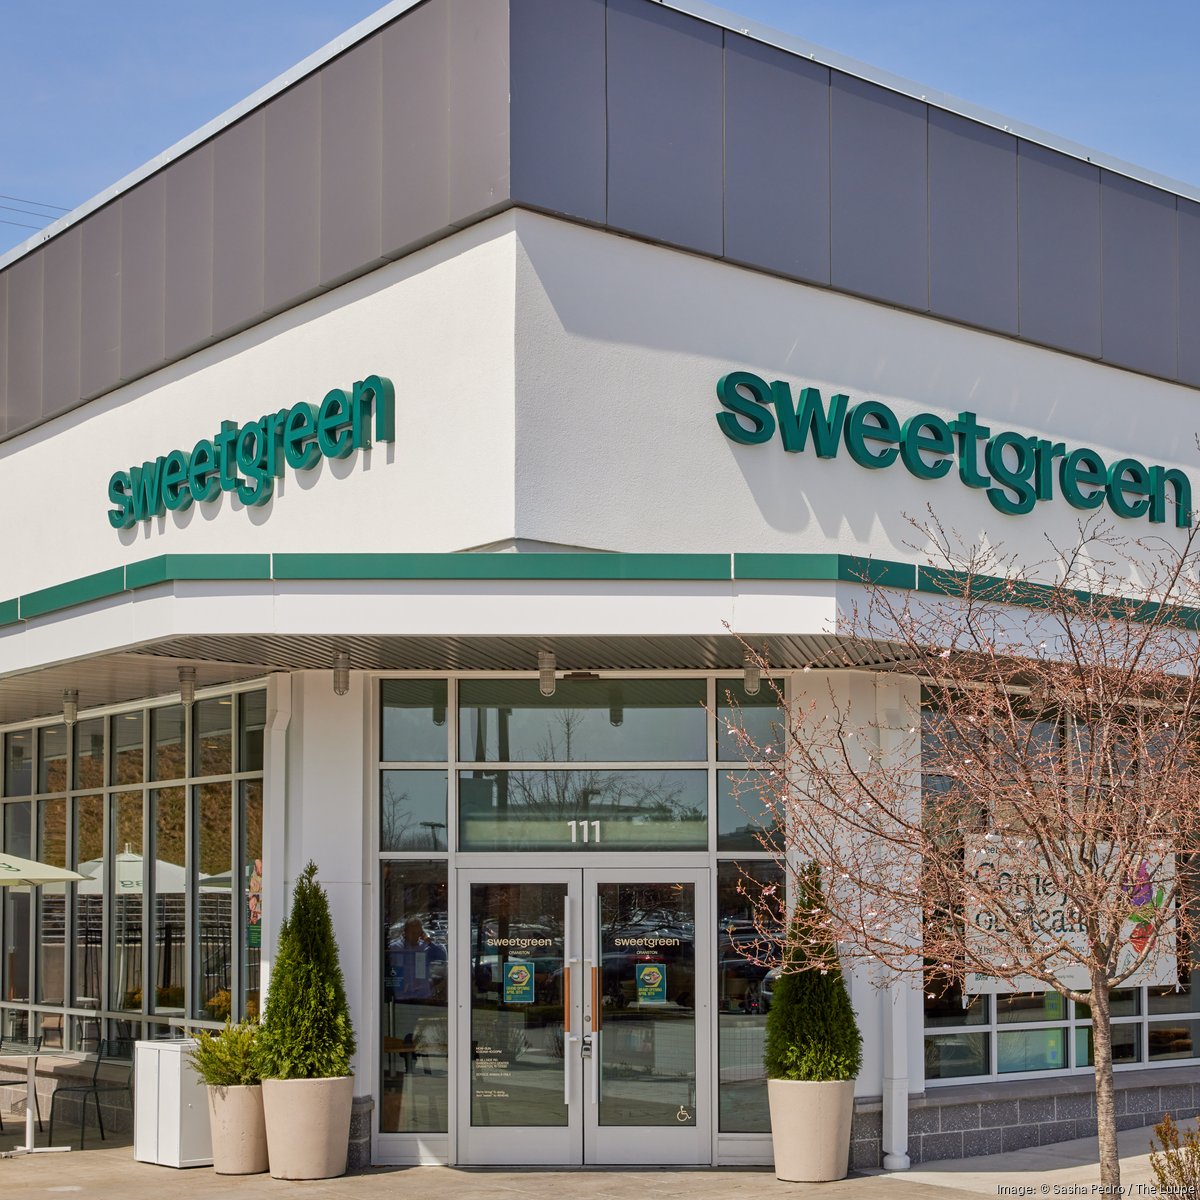 Sweetgreen restaurant makes Inland debut March 7 in Victoria